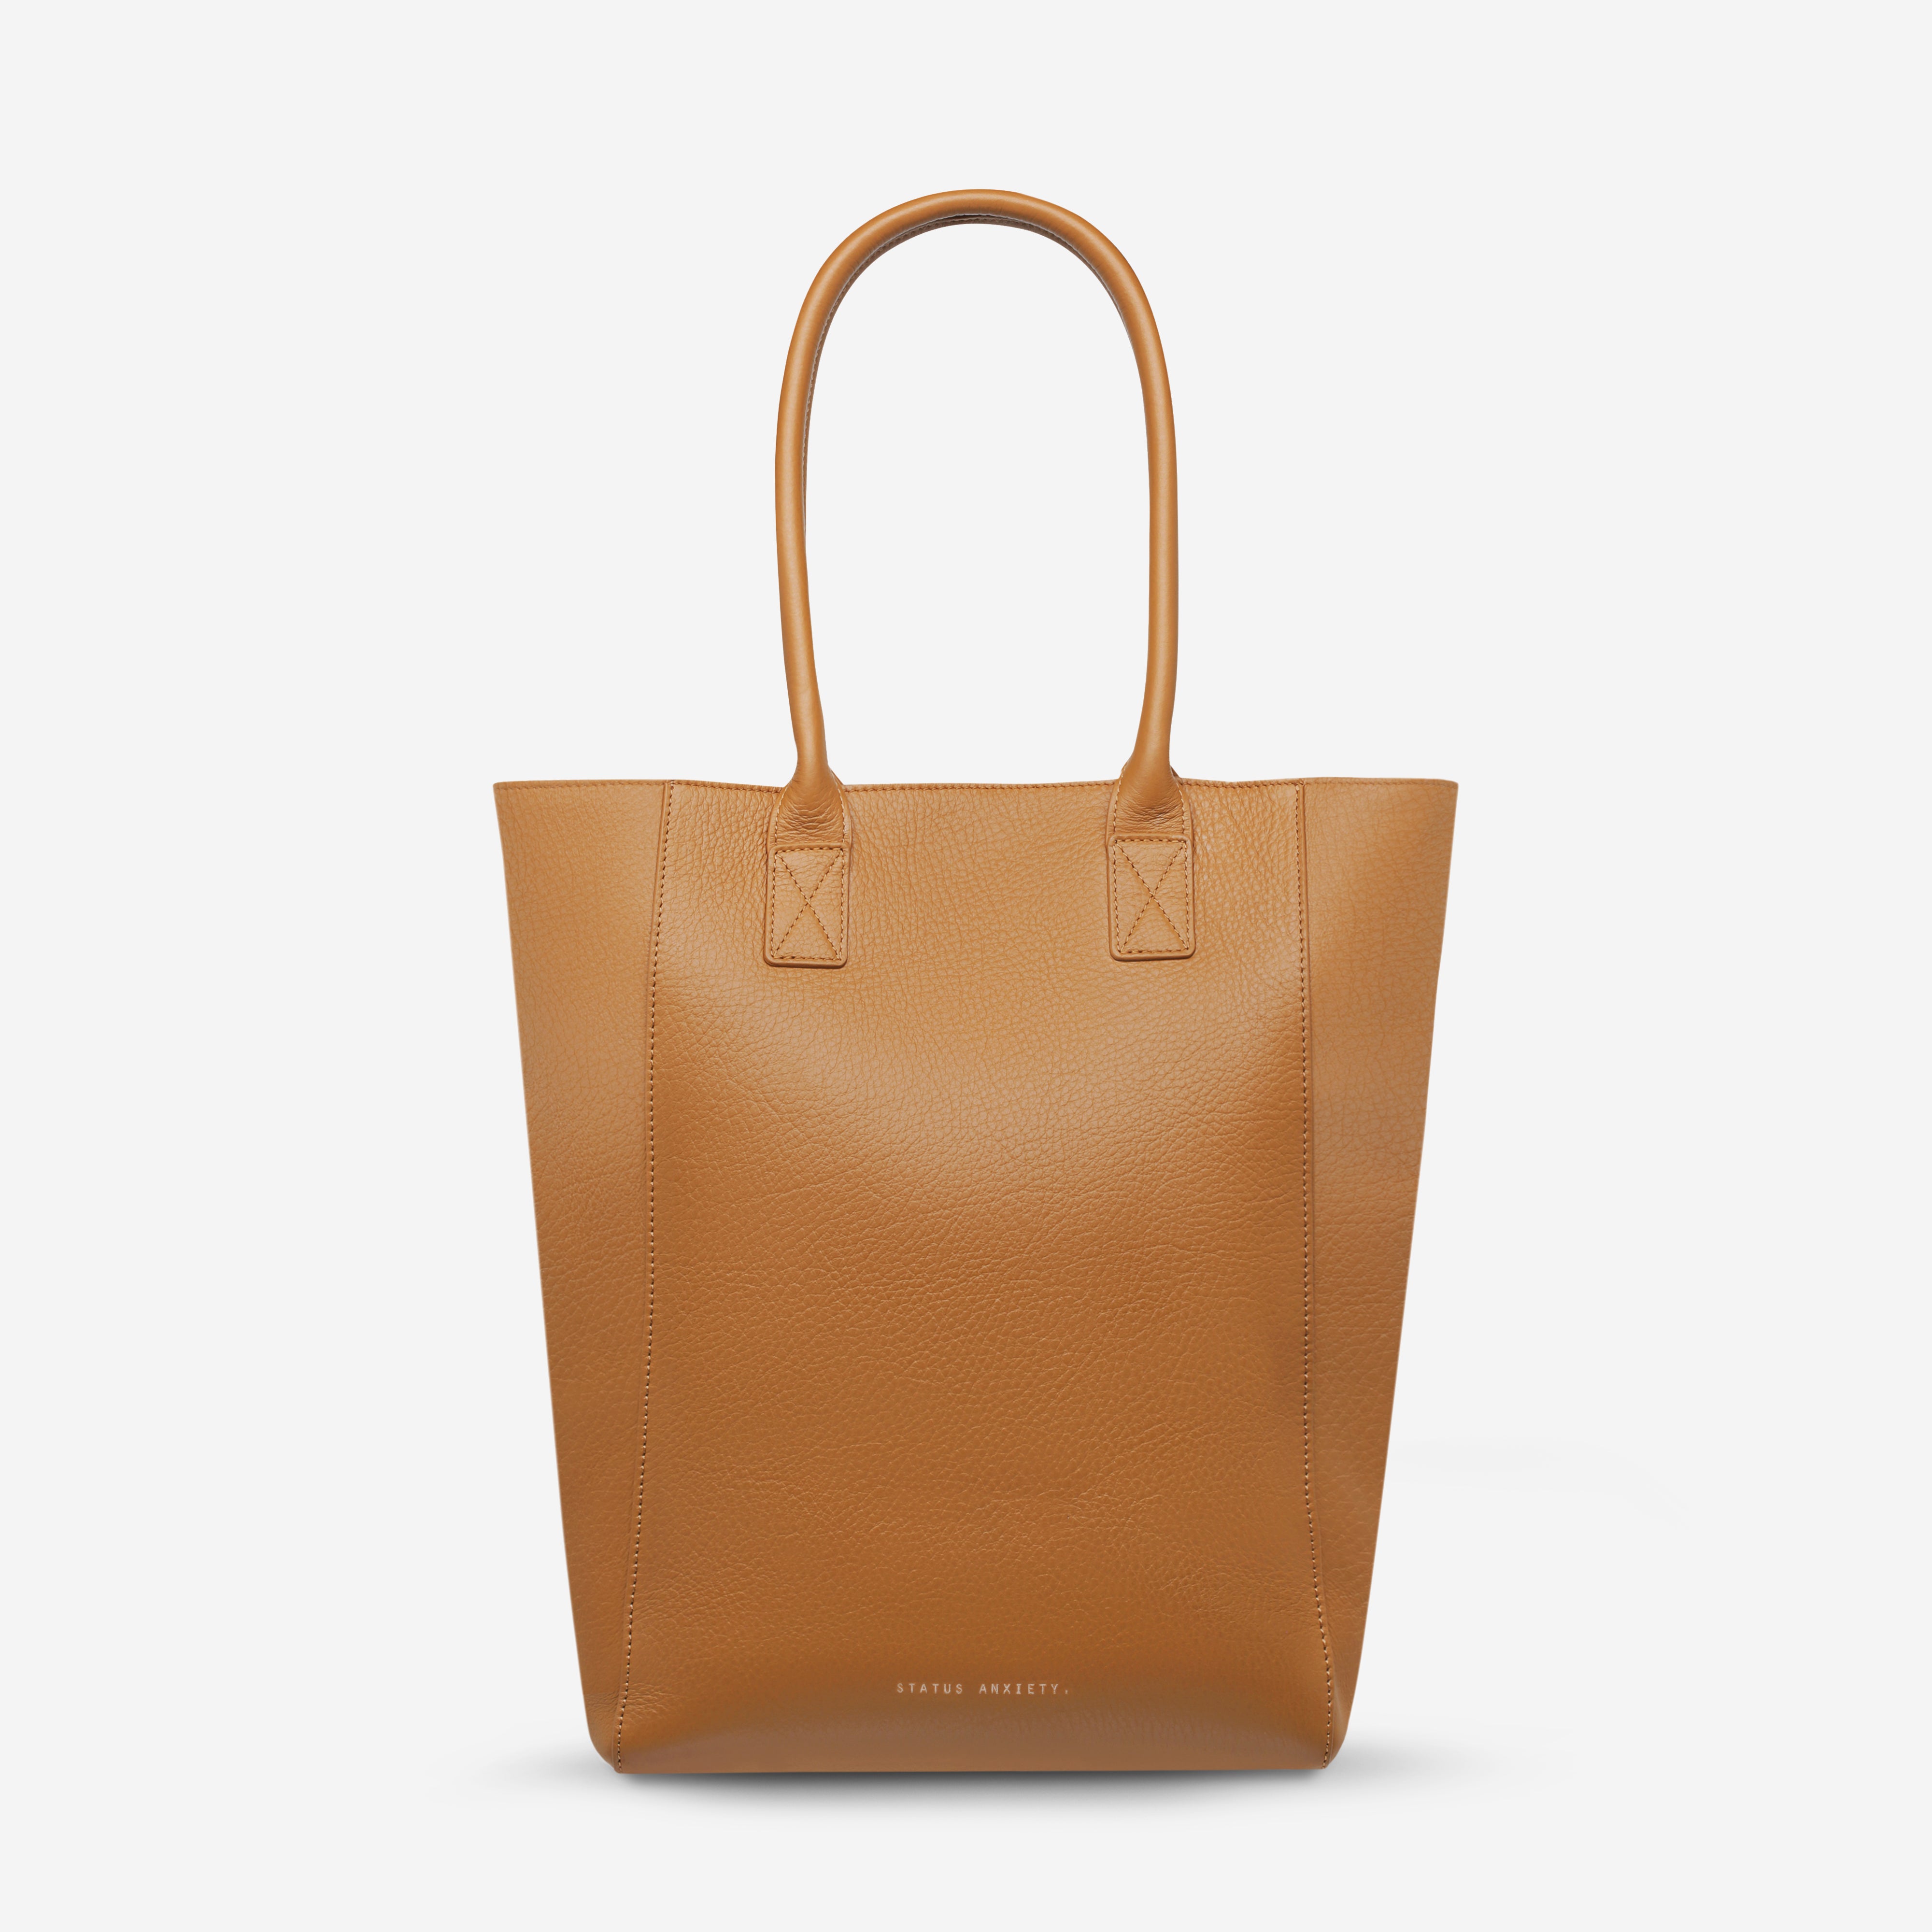 Status Anxiety Abscond Women's Leather Tote Bag Tan